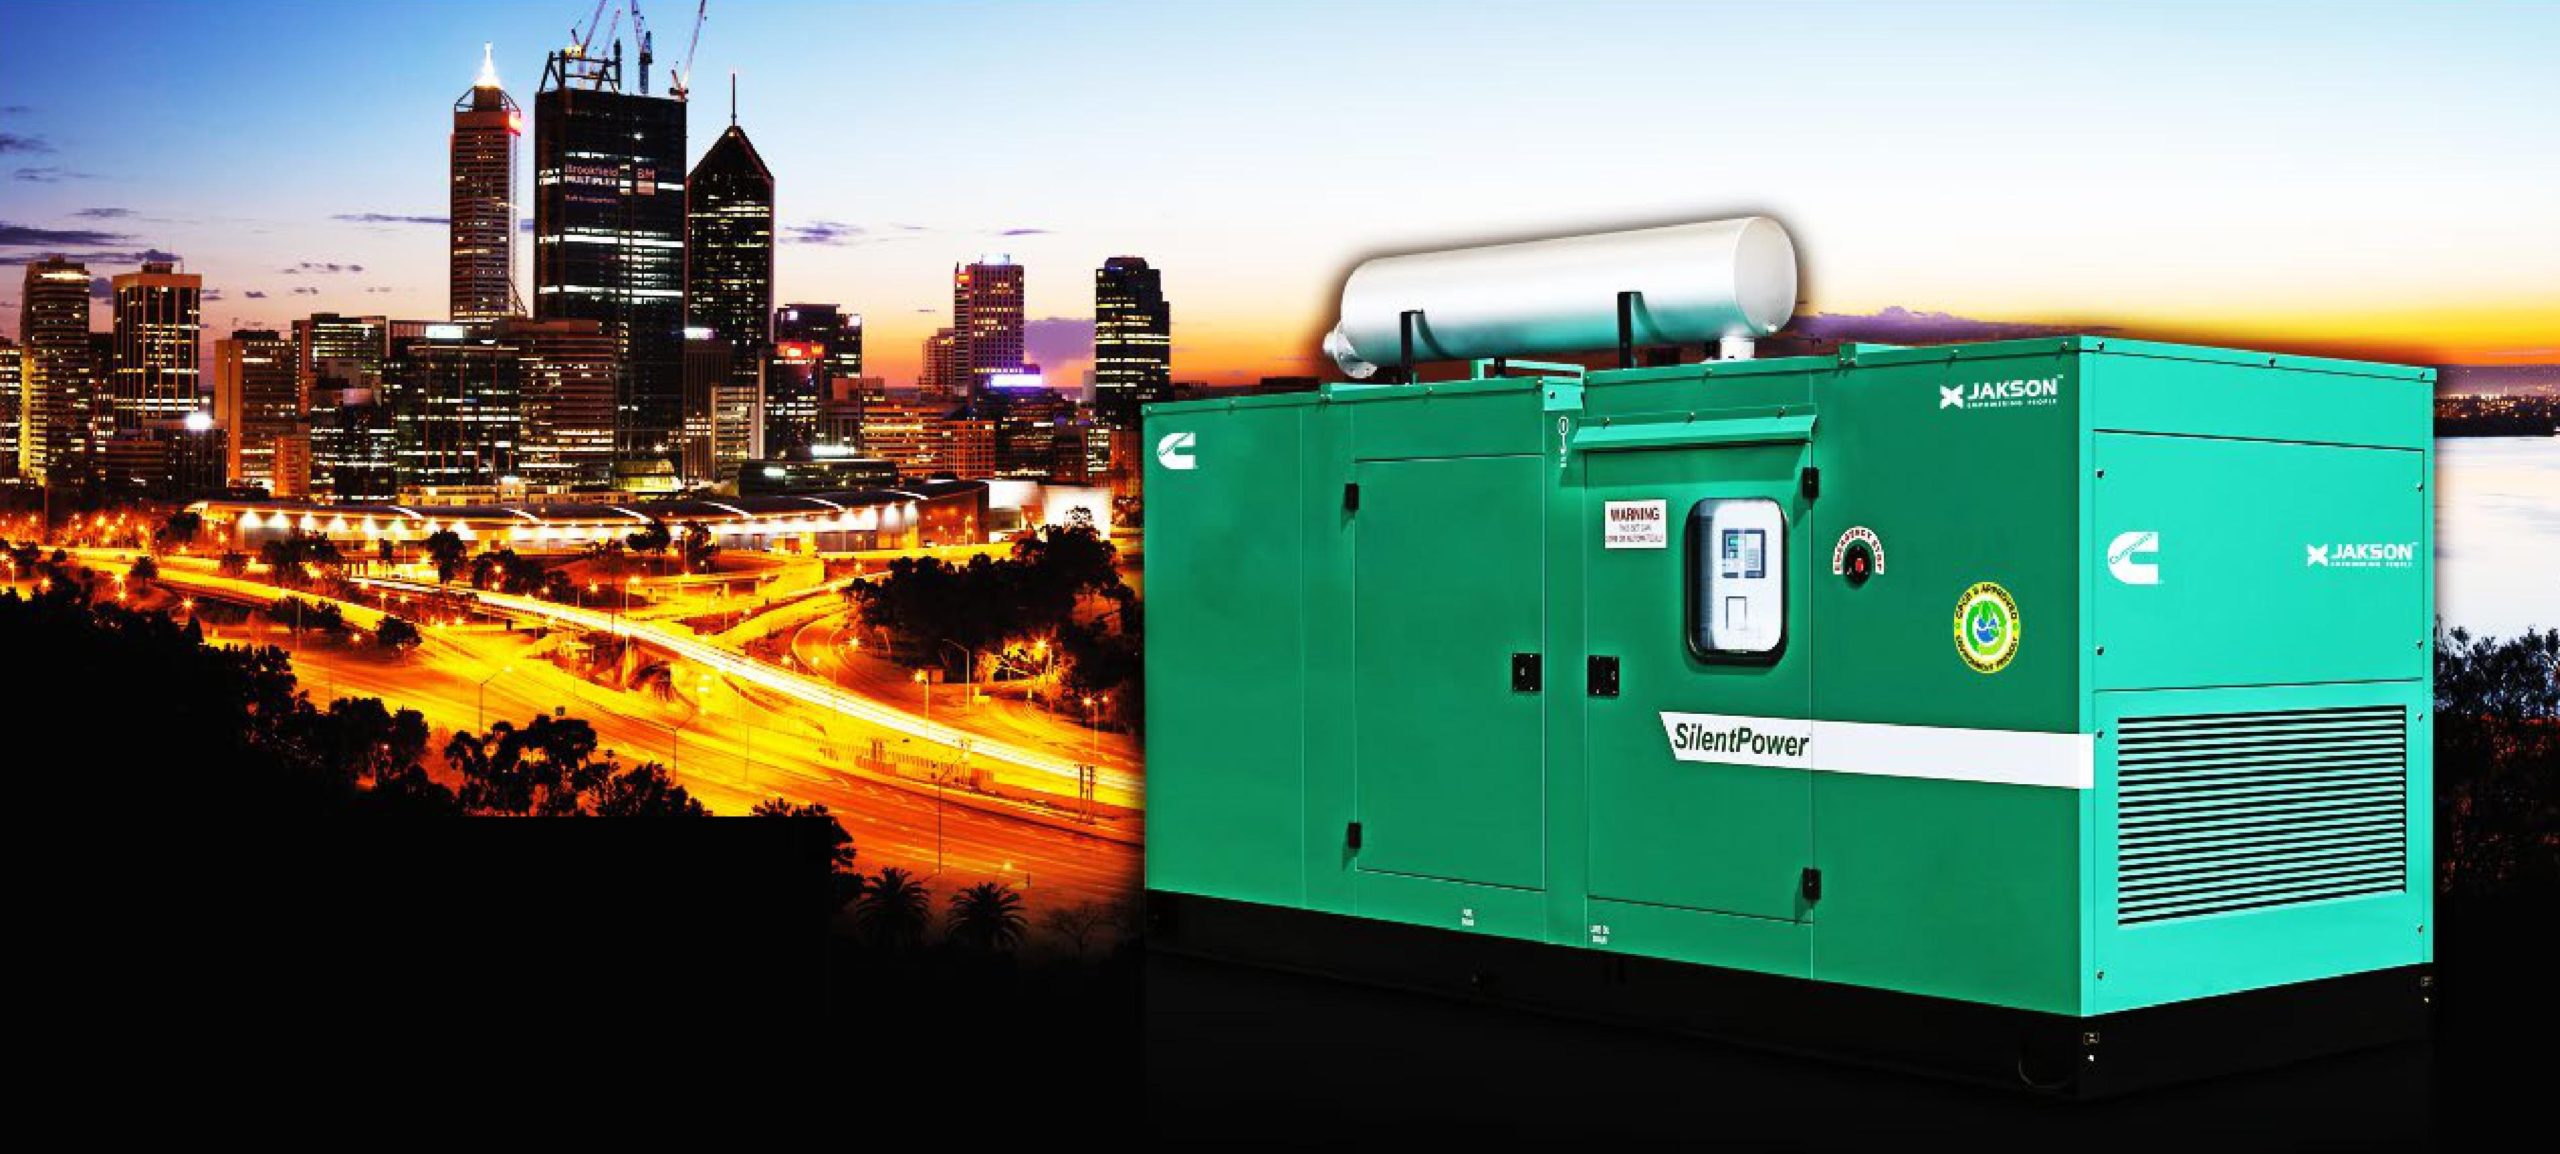 You are currently viewing JAKSON DIESEL GENERATOR